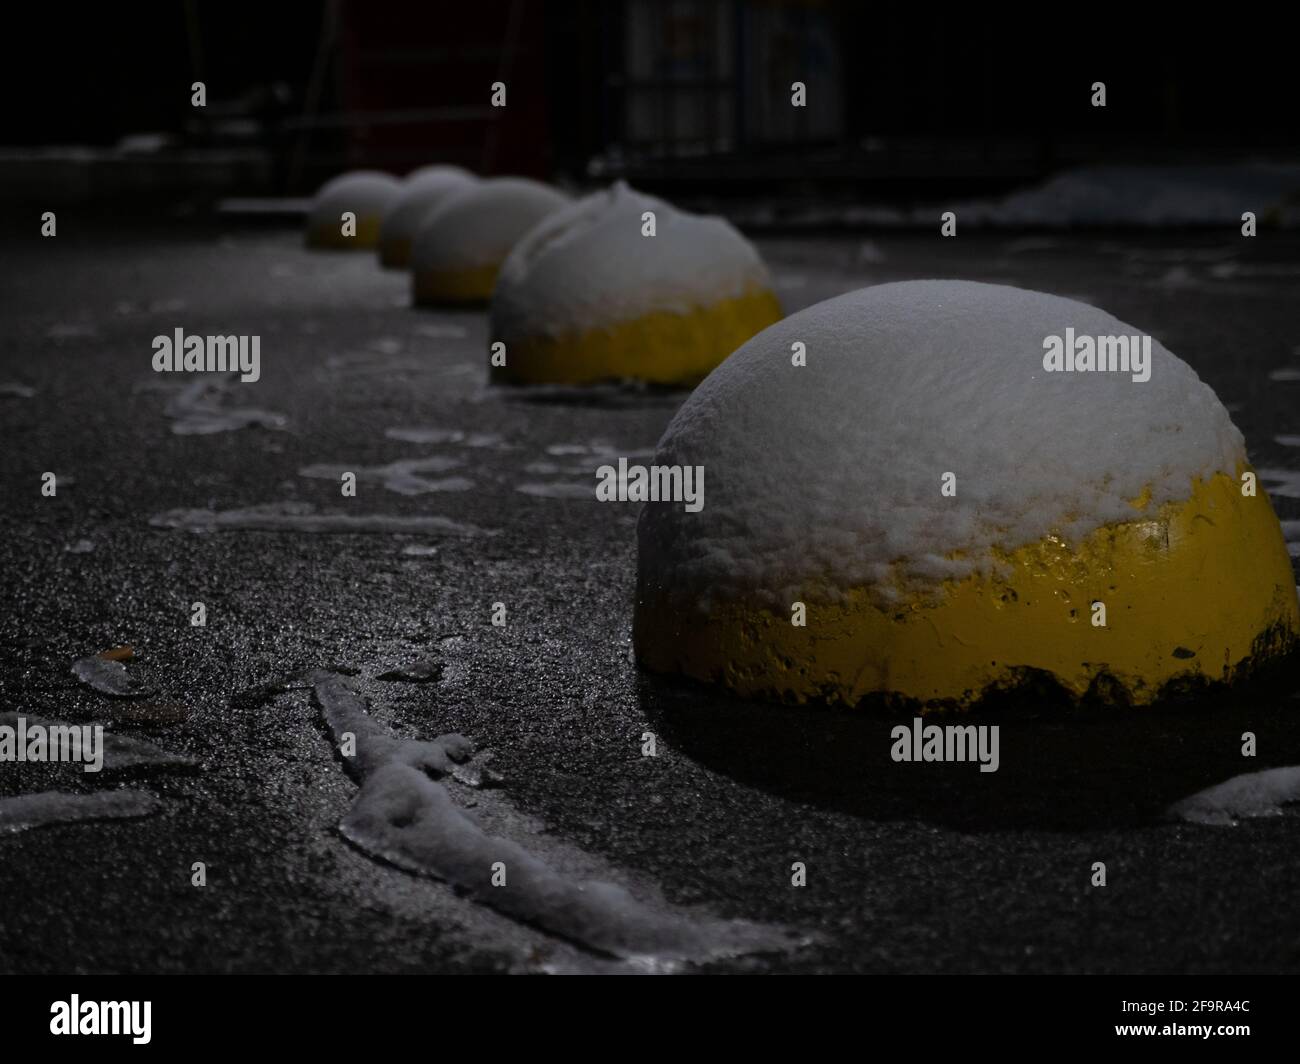 Yellow concrete anti-parking hemisphere-shaped bollards covered by snow and ice.  Roadside on a winter night. Stock Photo